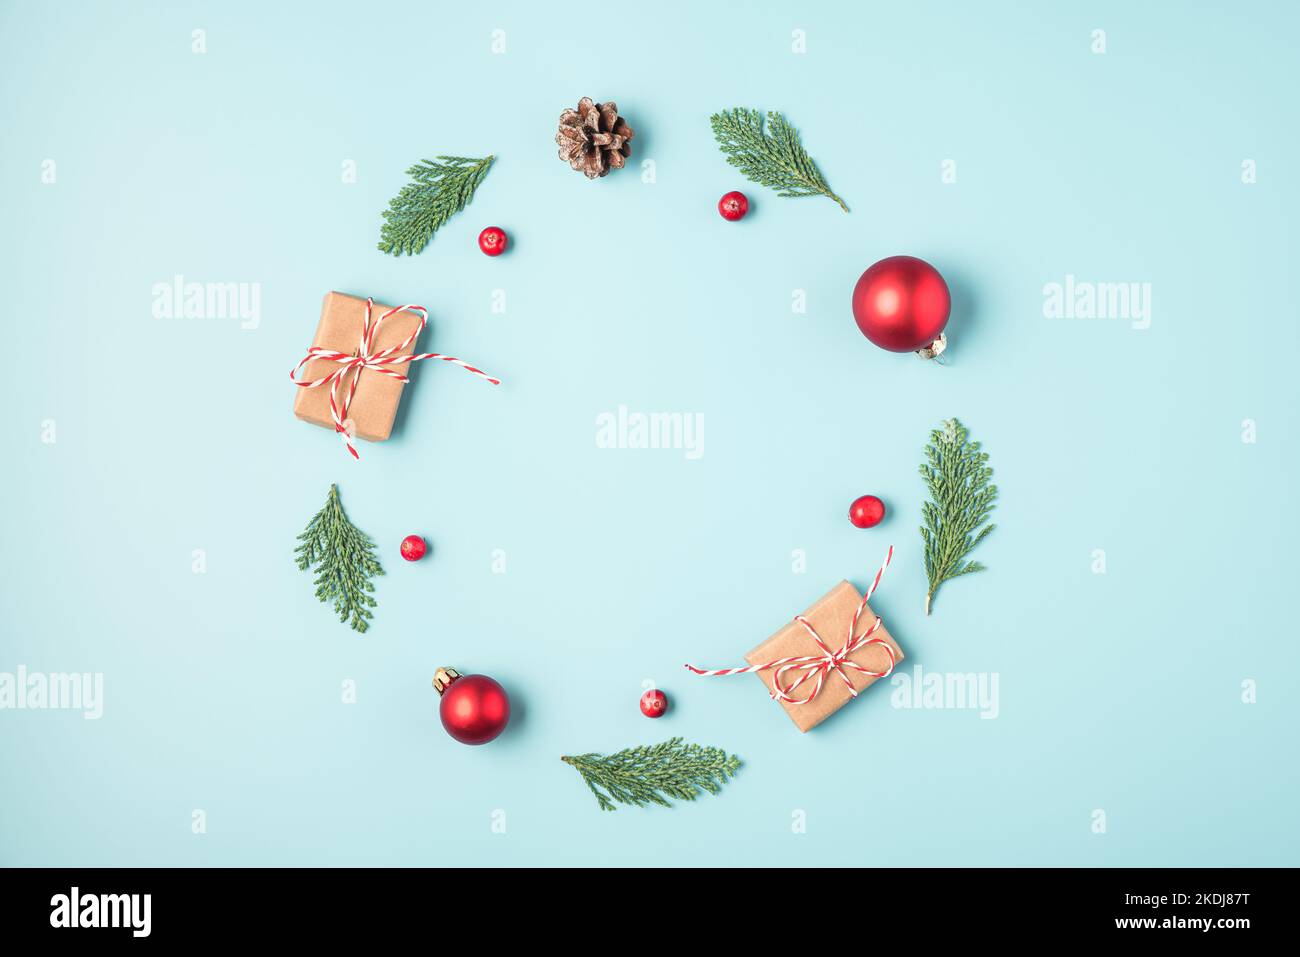 Christmas or Happy New Year frame made of fir tree branches, holiday decorations, gift boxes on blue background. Flat lay. Top view with copy space Stock Photo